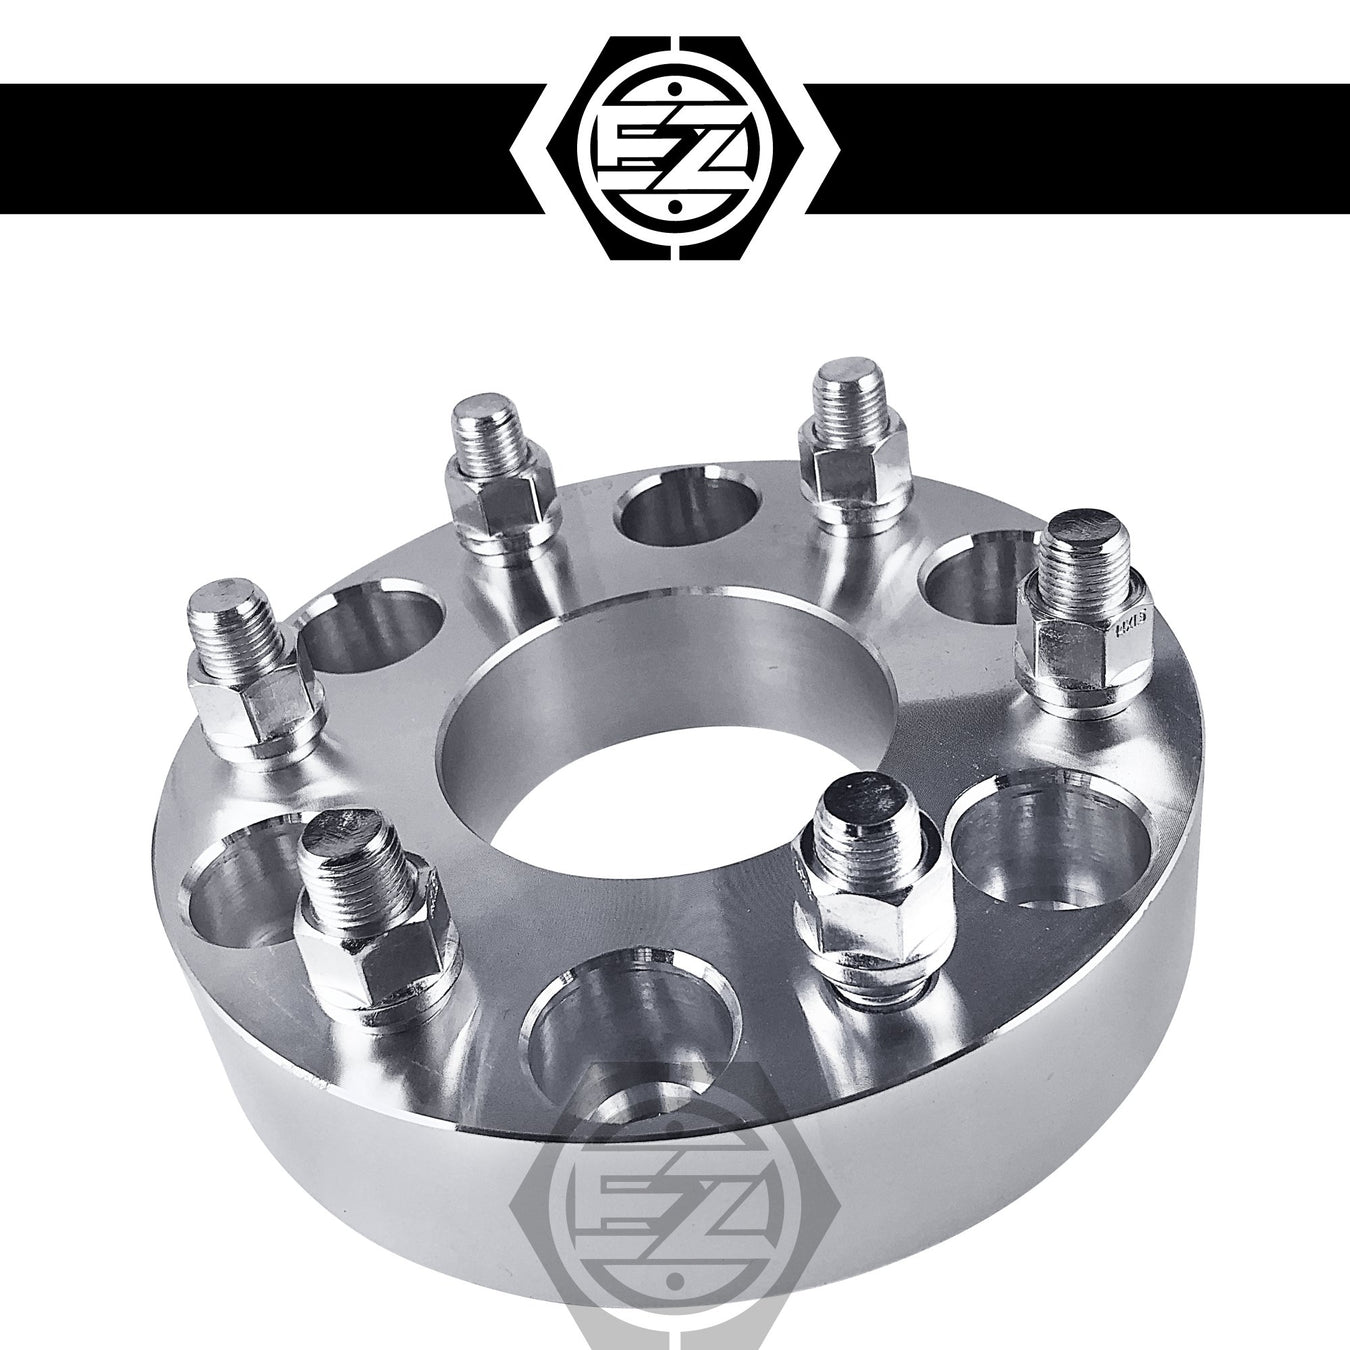 6 Lug Wheel Pattern Adapters for Changing Bolt Patterns